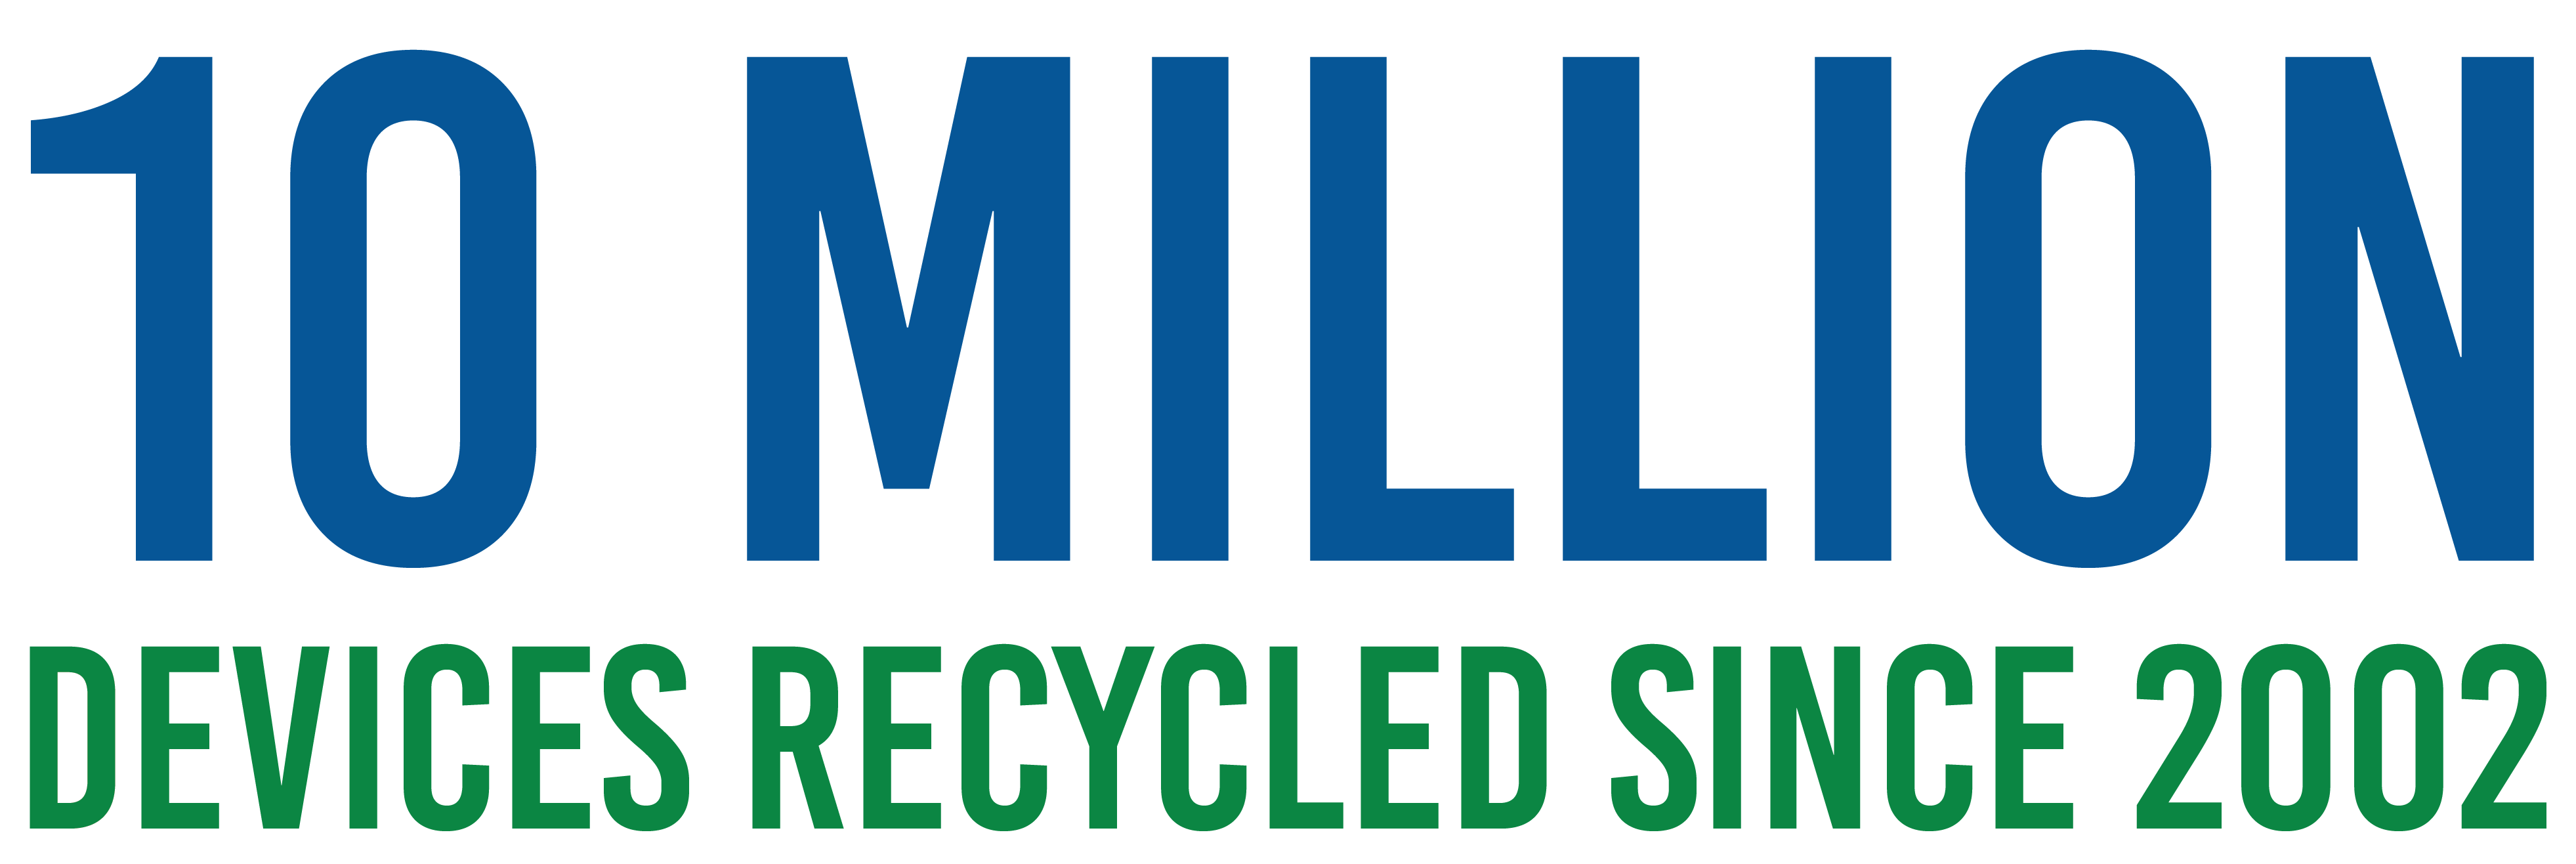 SmartphoneRecycling.com has Responsibly Recycled Over 10 Million Devices Since 2002